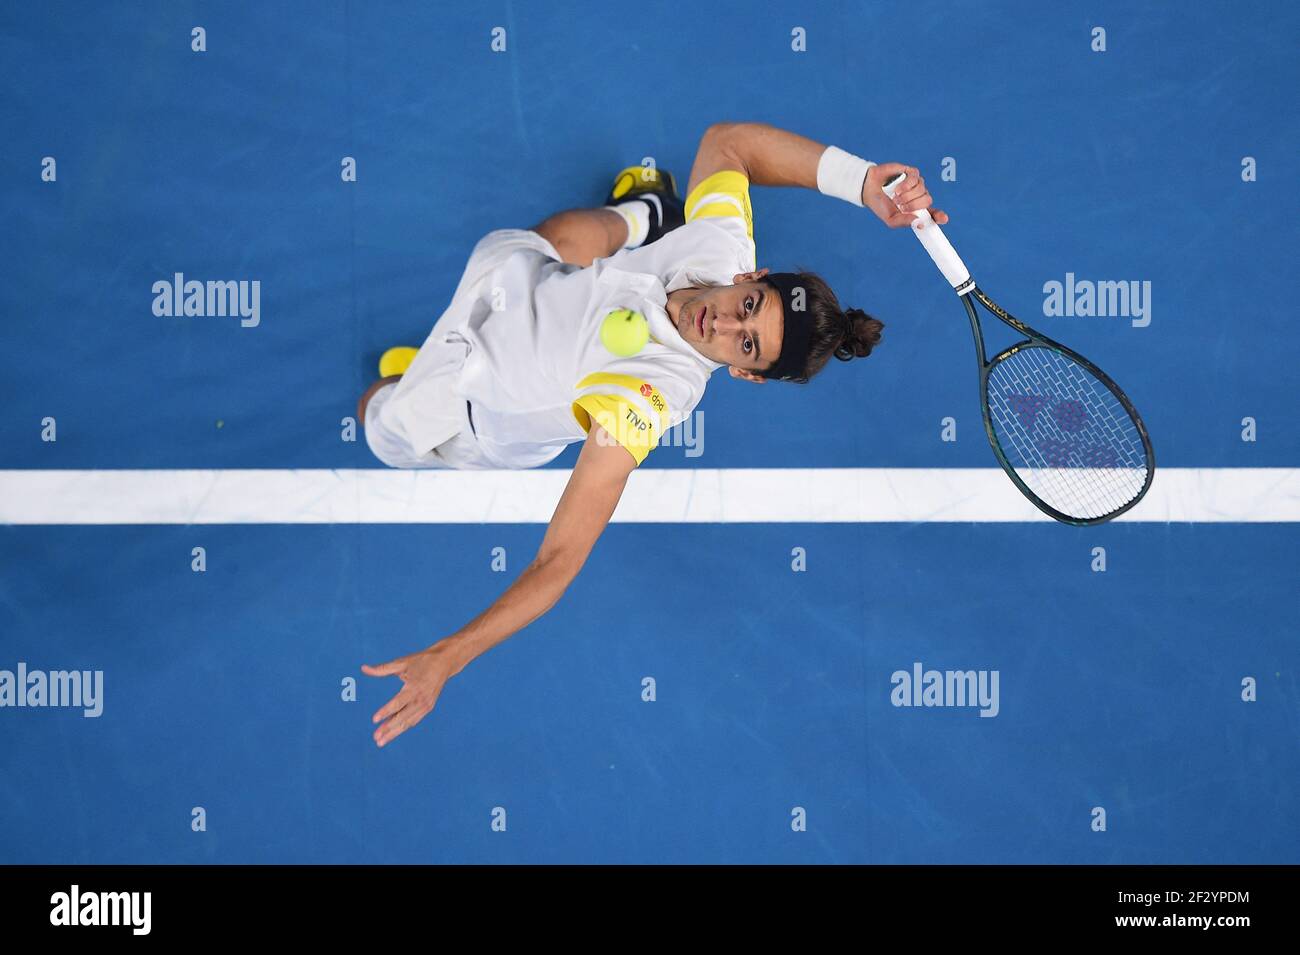 Pierre-Hugues Herbert (FRA) during his semi final round match at the Open  13 Provence in Marseille, on March, 13, 2021. Photo by Corinne  Dubreuil/ABACAPRESS.COM Stock Photo - Alamy